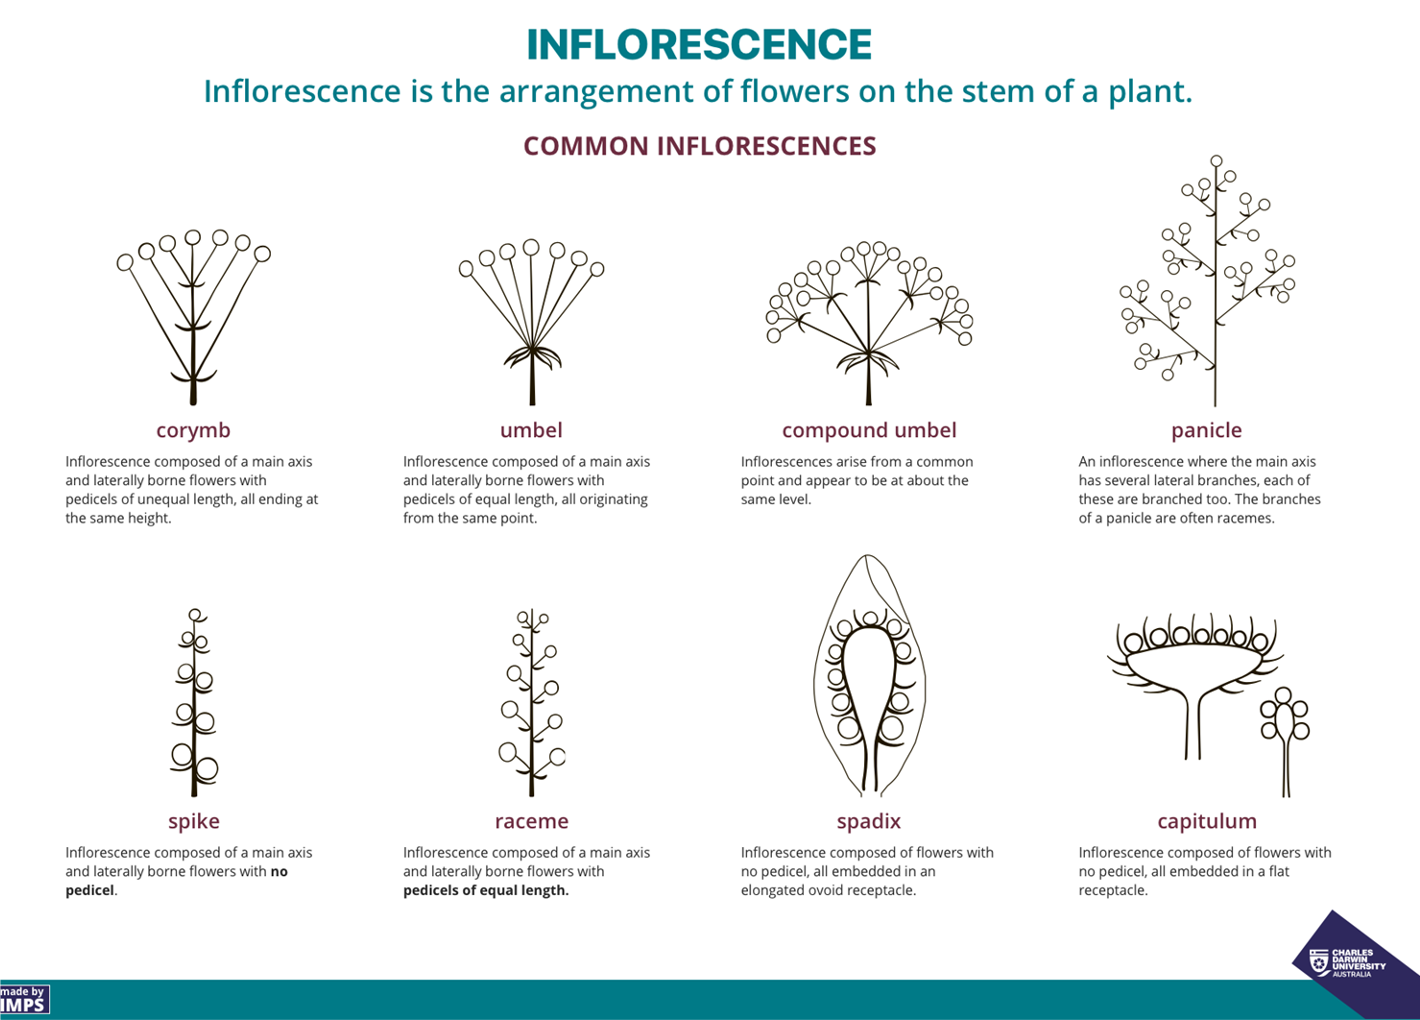 diagrams of the common inflorescences, including corymb, umbel, compound umbel, panicle, spike, raceme, spadix and capitulum